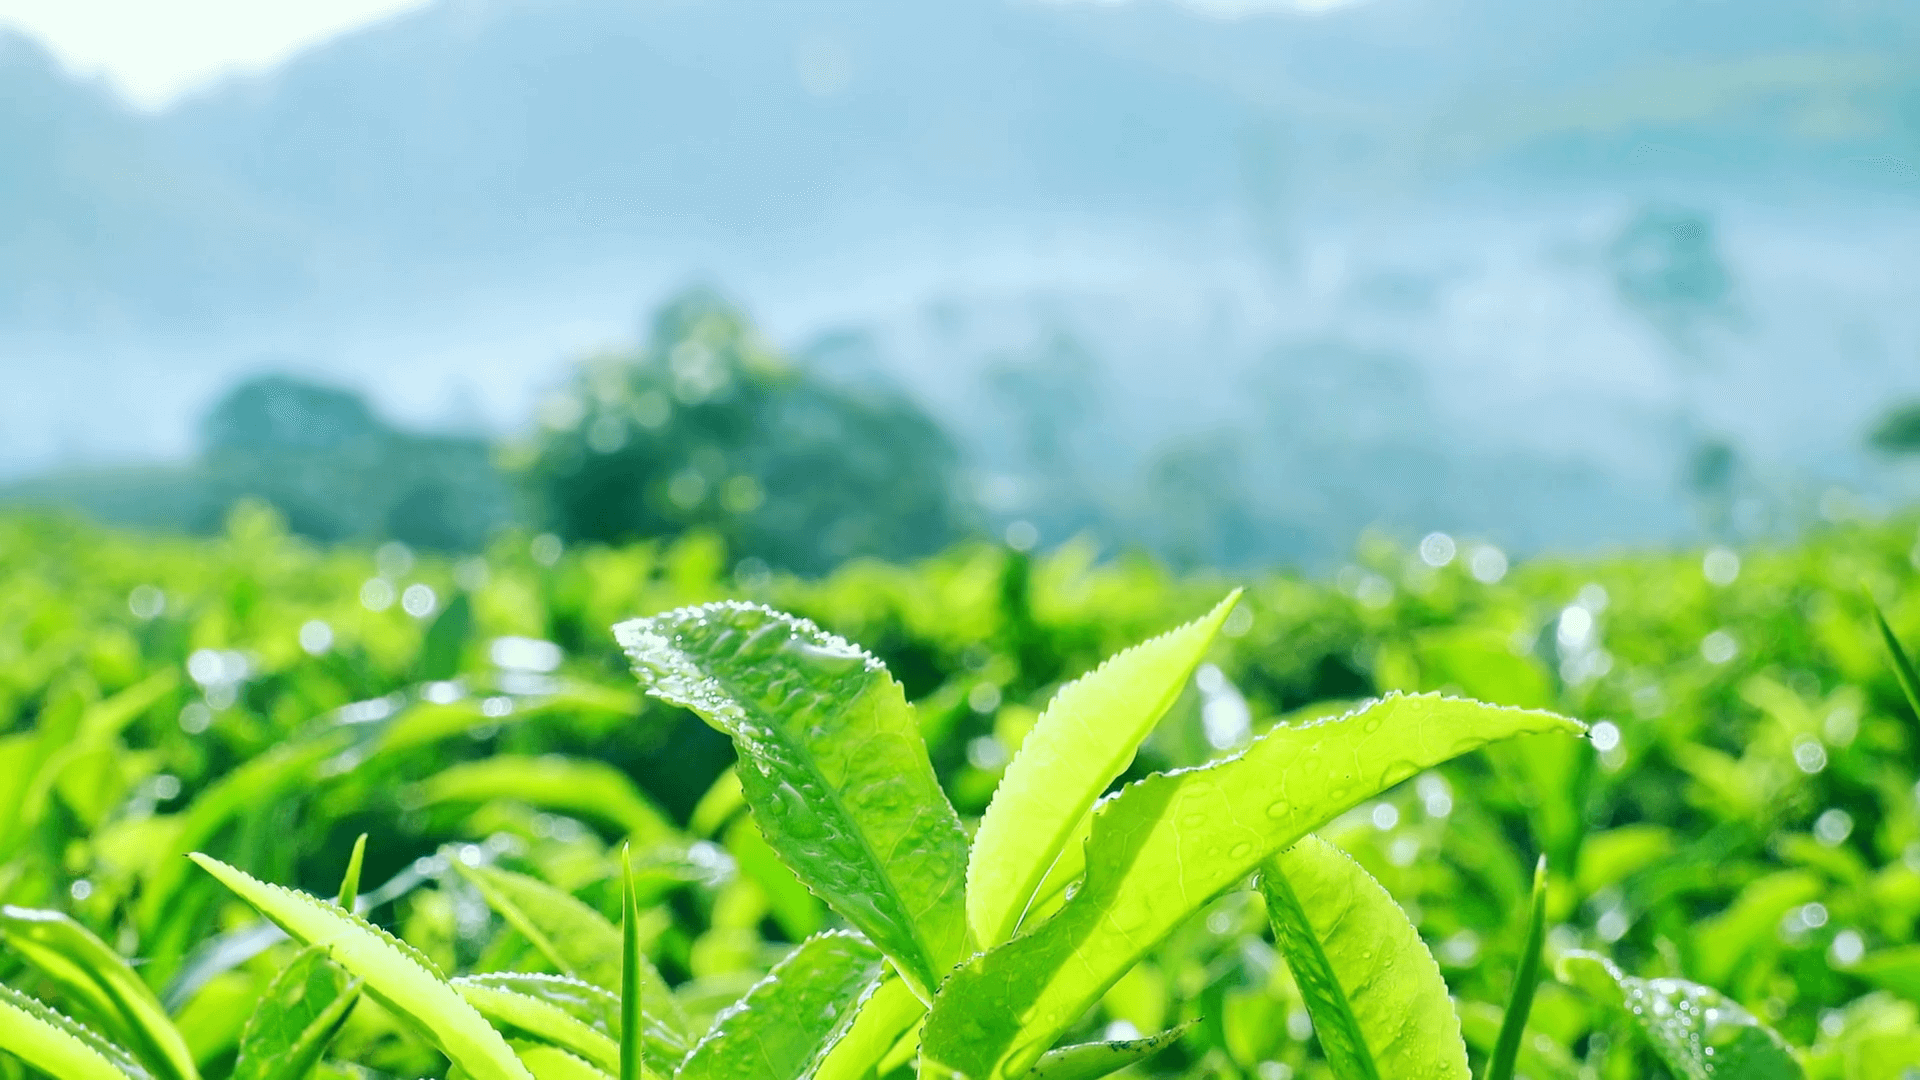 Green Tea Benefits for Skin: How Green Tea Extract Helps Your Skin